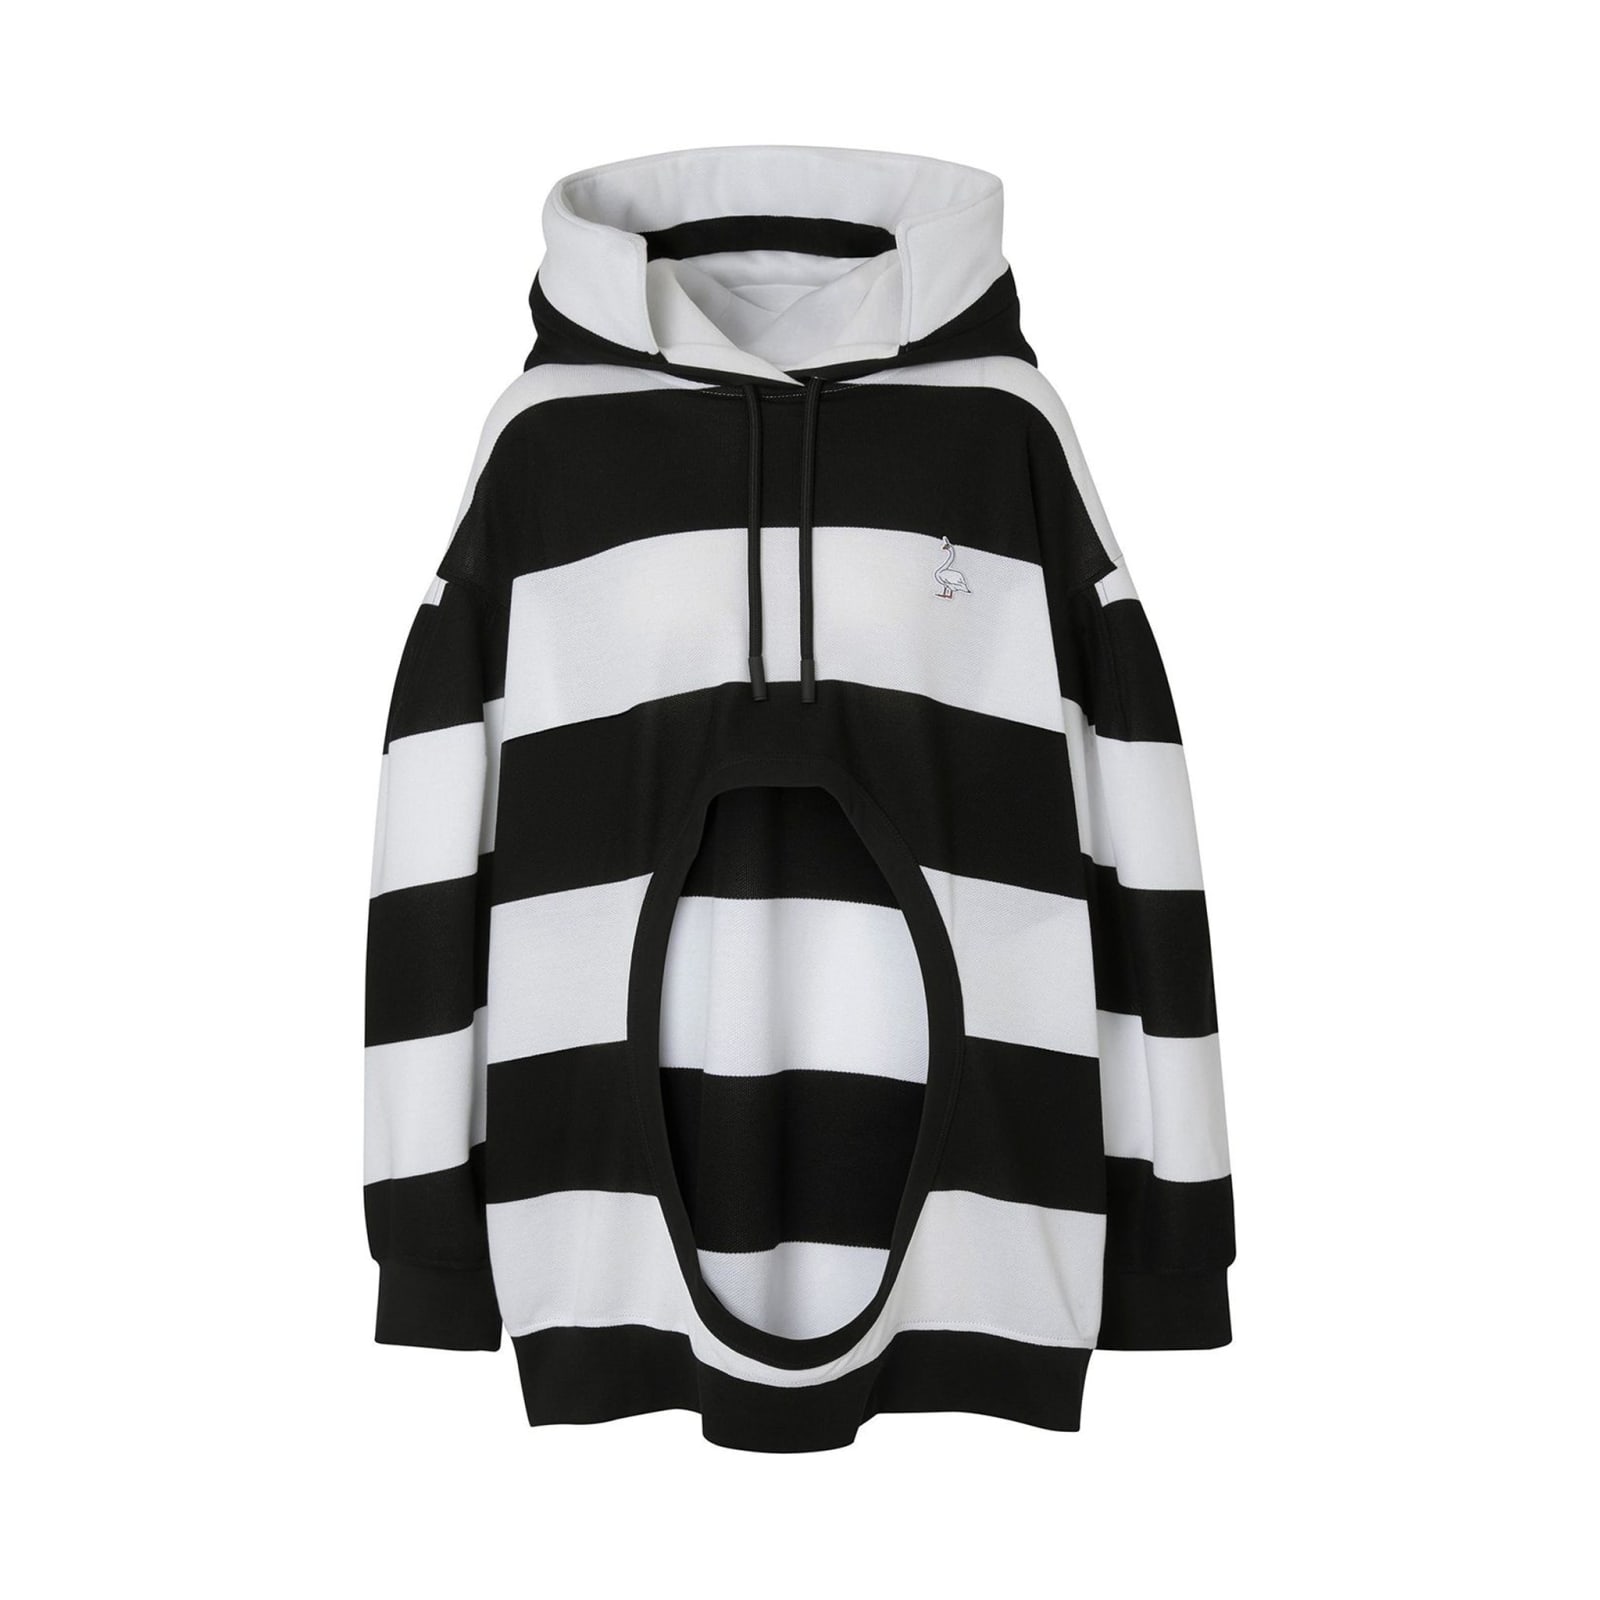 Burberry Cut-out Striped Hooded Sweatshirt